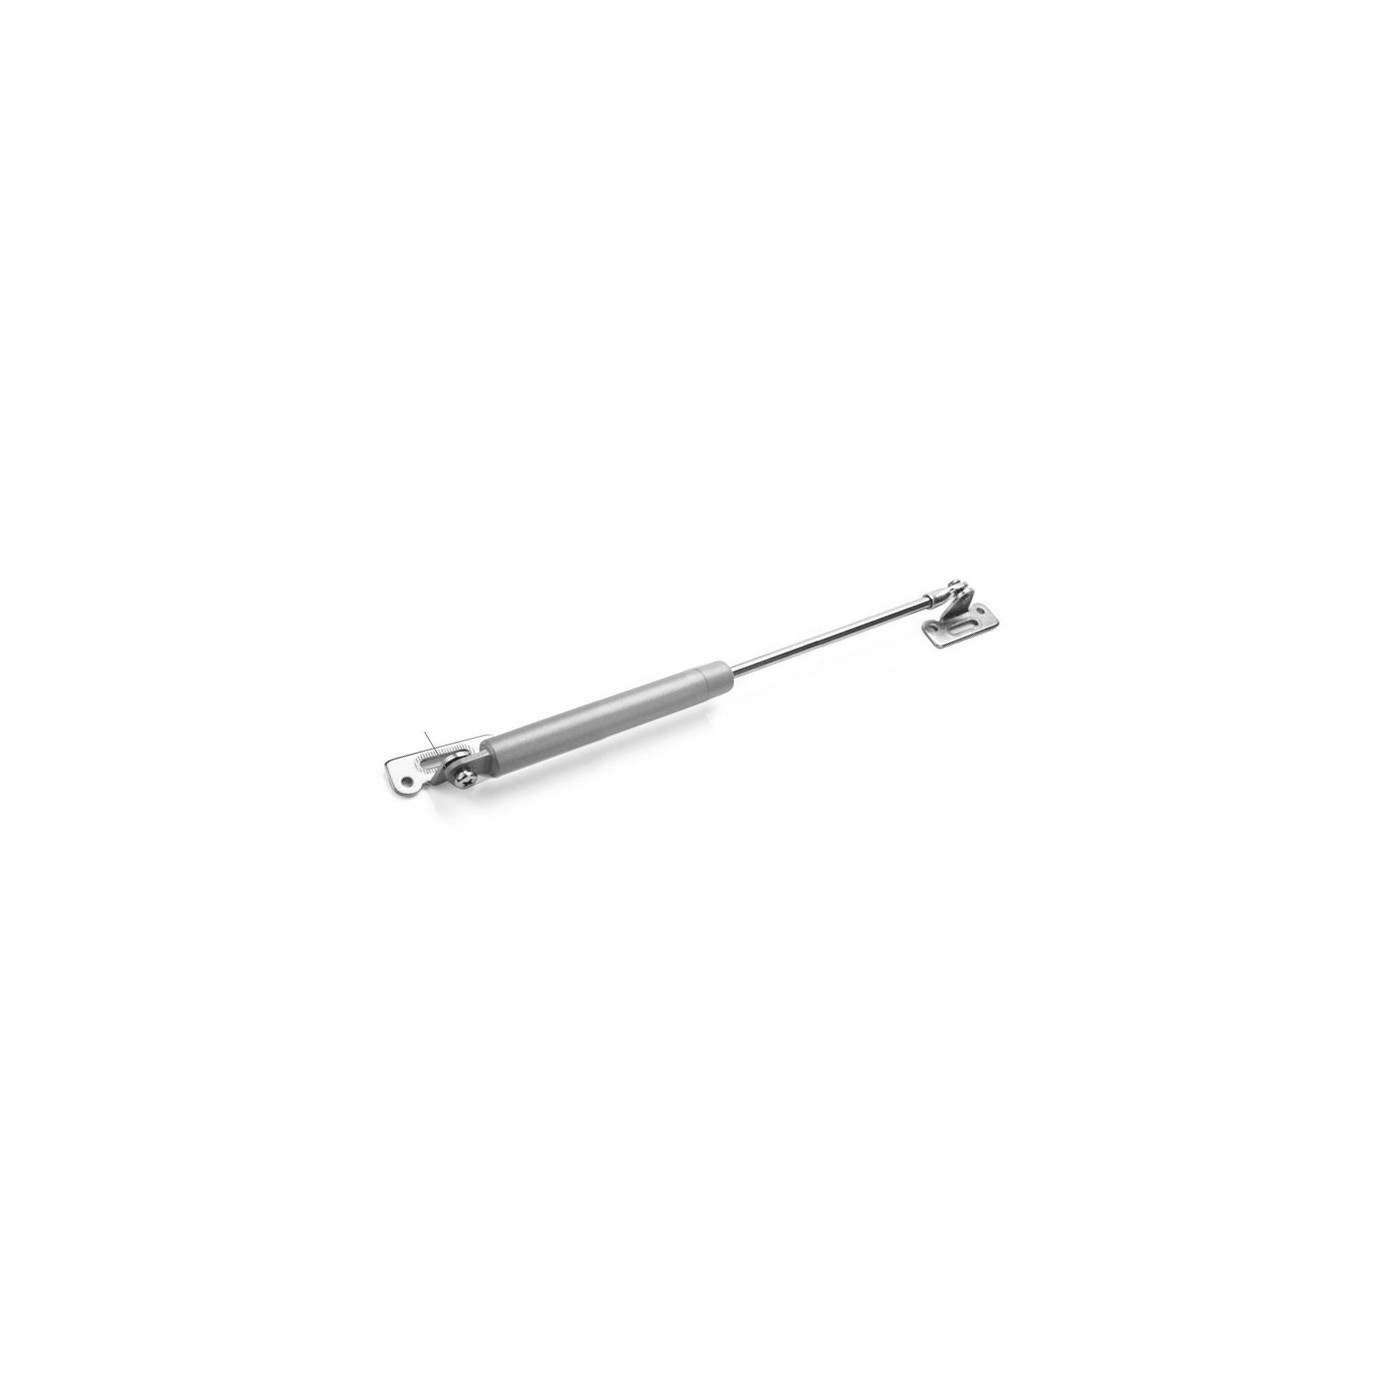 Universal gas spring with brackets (250N/25kg, 248 mm, gray)